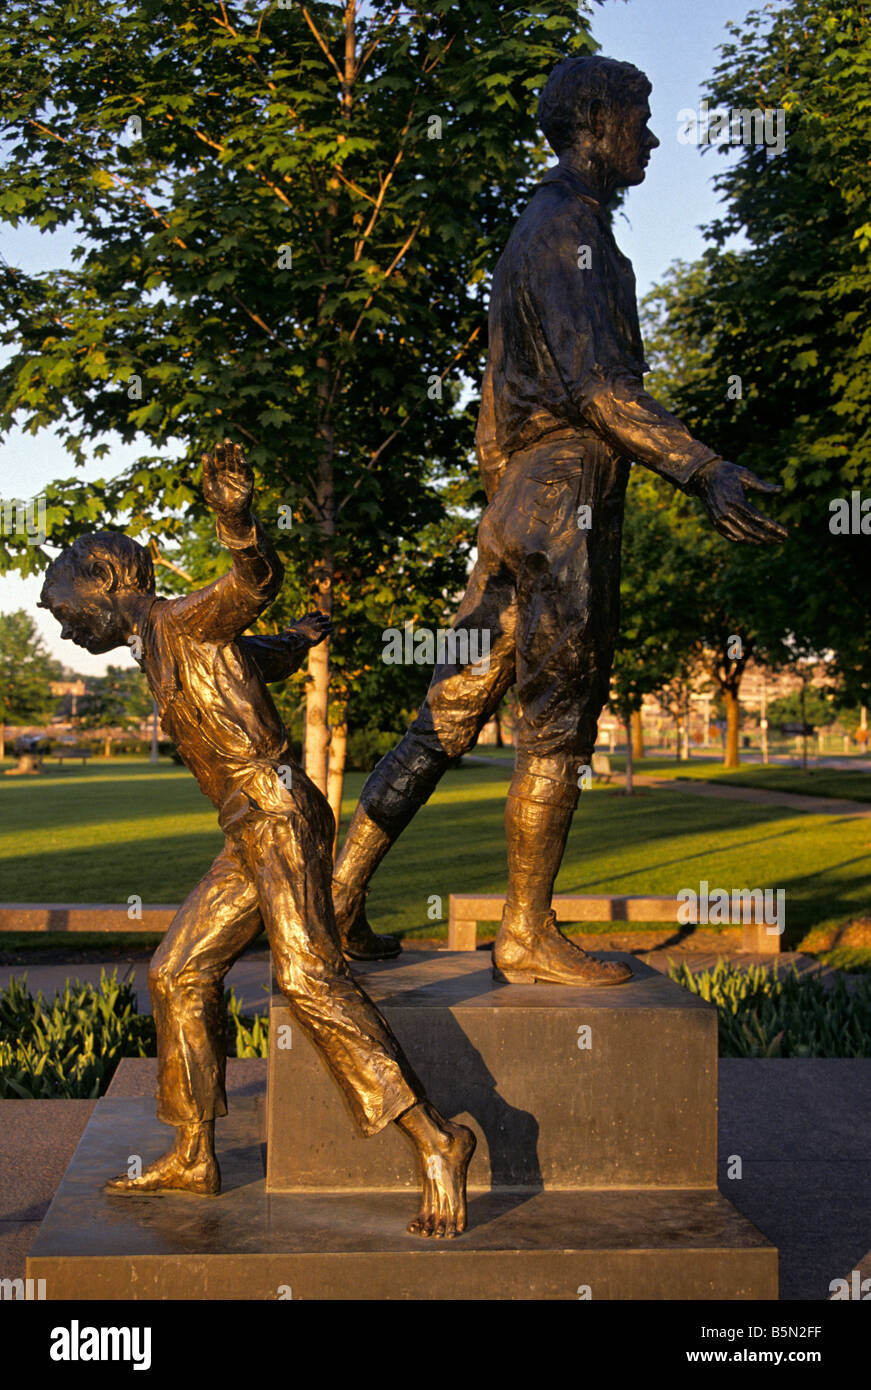 STATUE OF CHARLES LINDBERG, THE BOY AND THE MAN, BY PAUL GRANLUND. STATE CAPITOL GROUNDS, ST. PAUL, MINNESOTA. Stock Photo